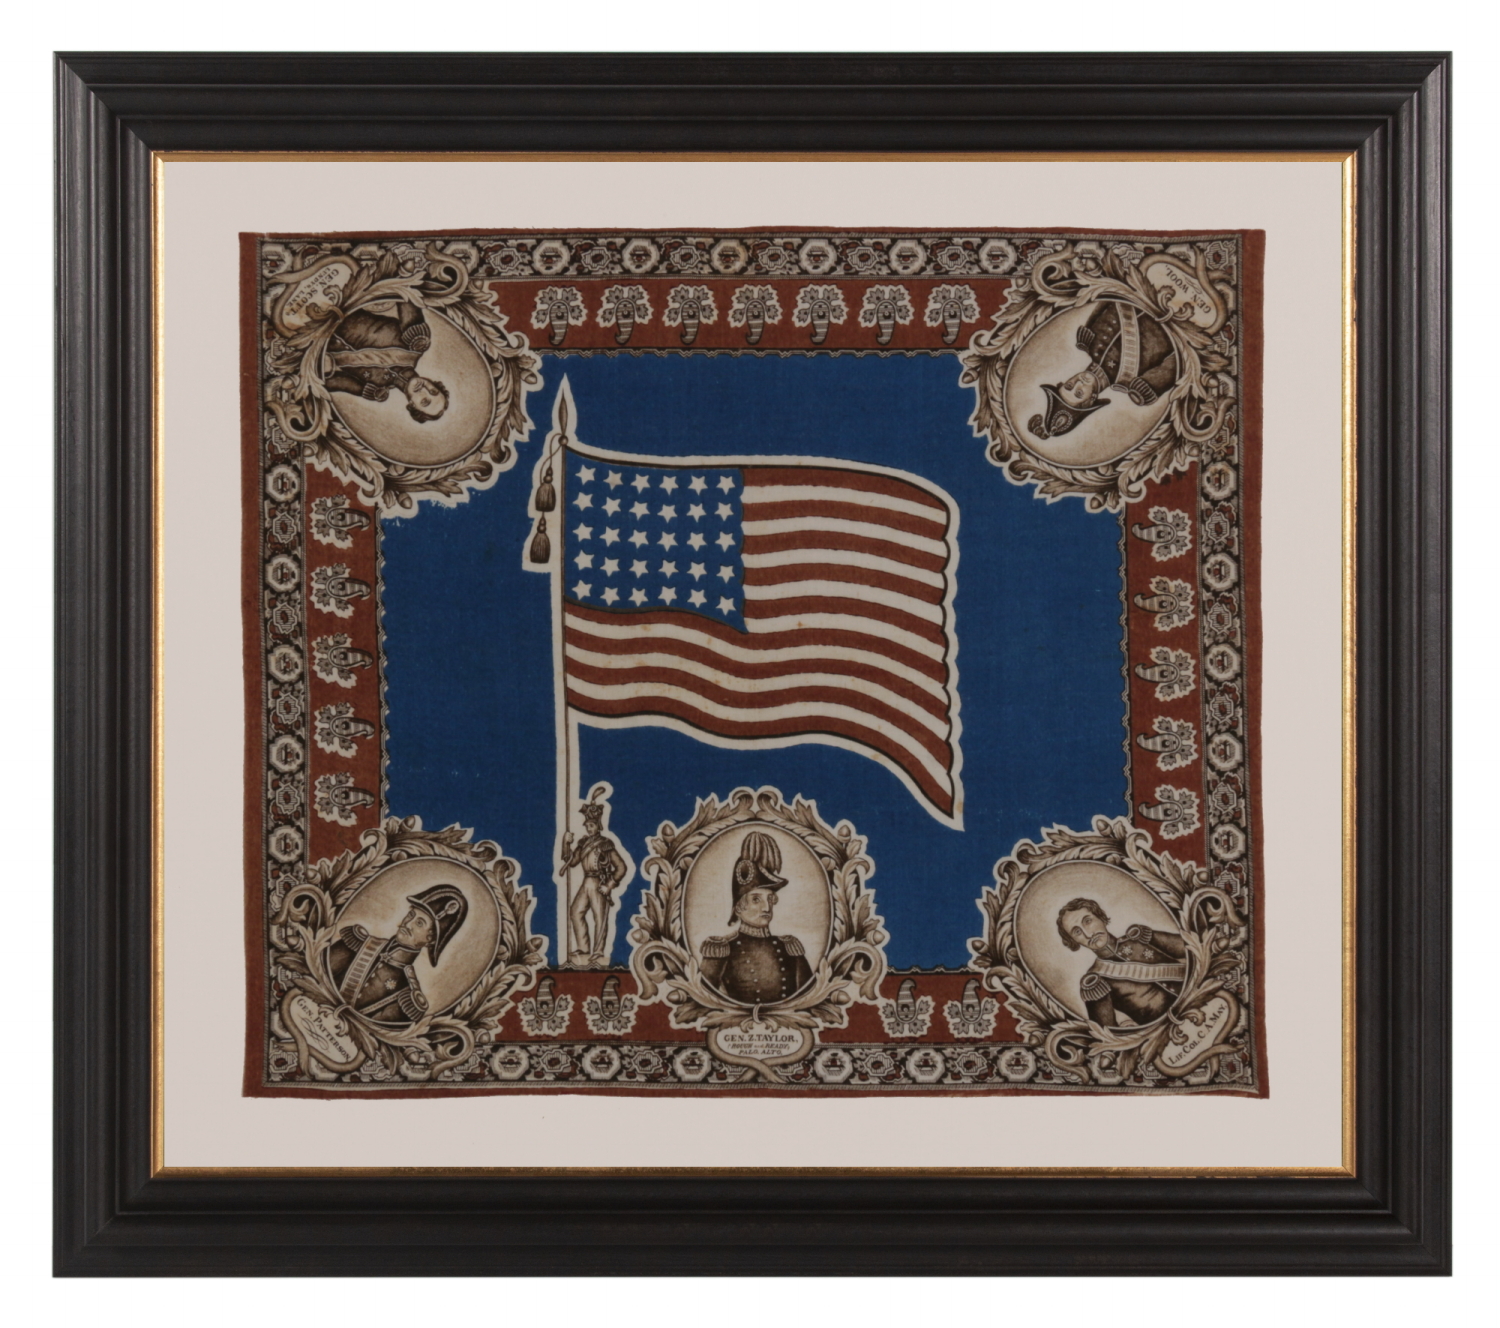 GRAPHIC AND COLORFUL, PORTRAIT STYLE KERCHIEF MADE FOR THE 1848 PRESIDENTIAL CAMPAIGN OF ZACHARY TAYLOR, WITH PORTRAITS OF FOUR OTHER MEXICAN WAR OFFICERS AND A WAVING 30 STAR FLAG